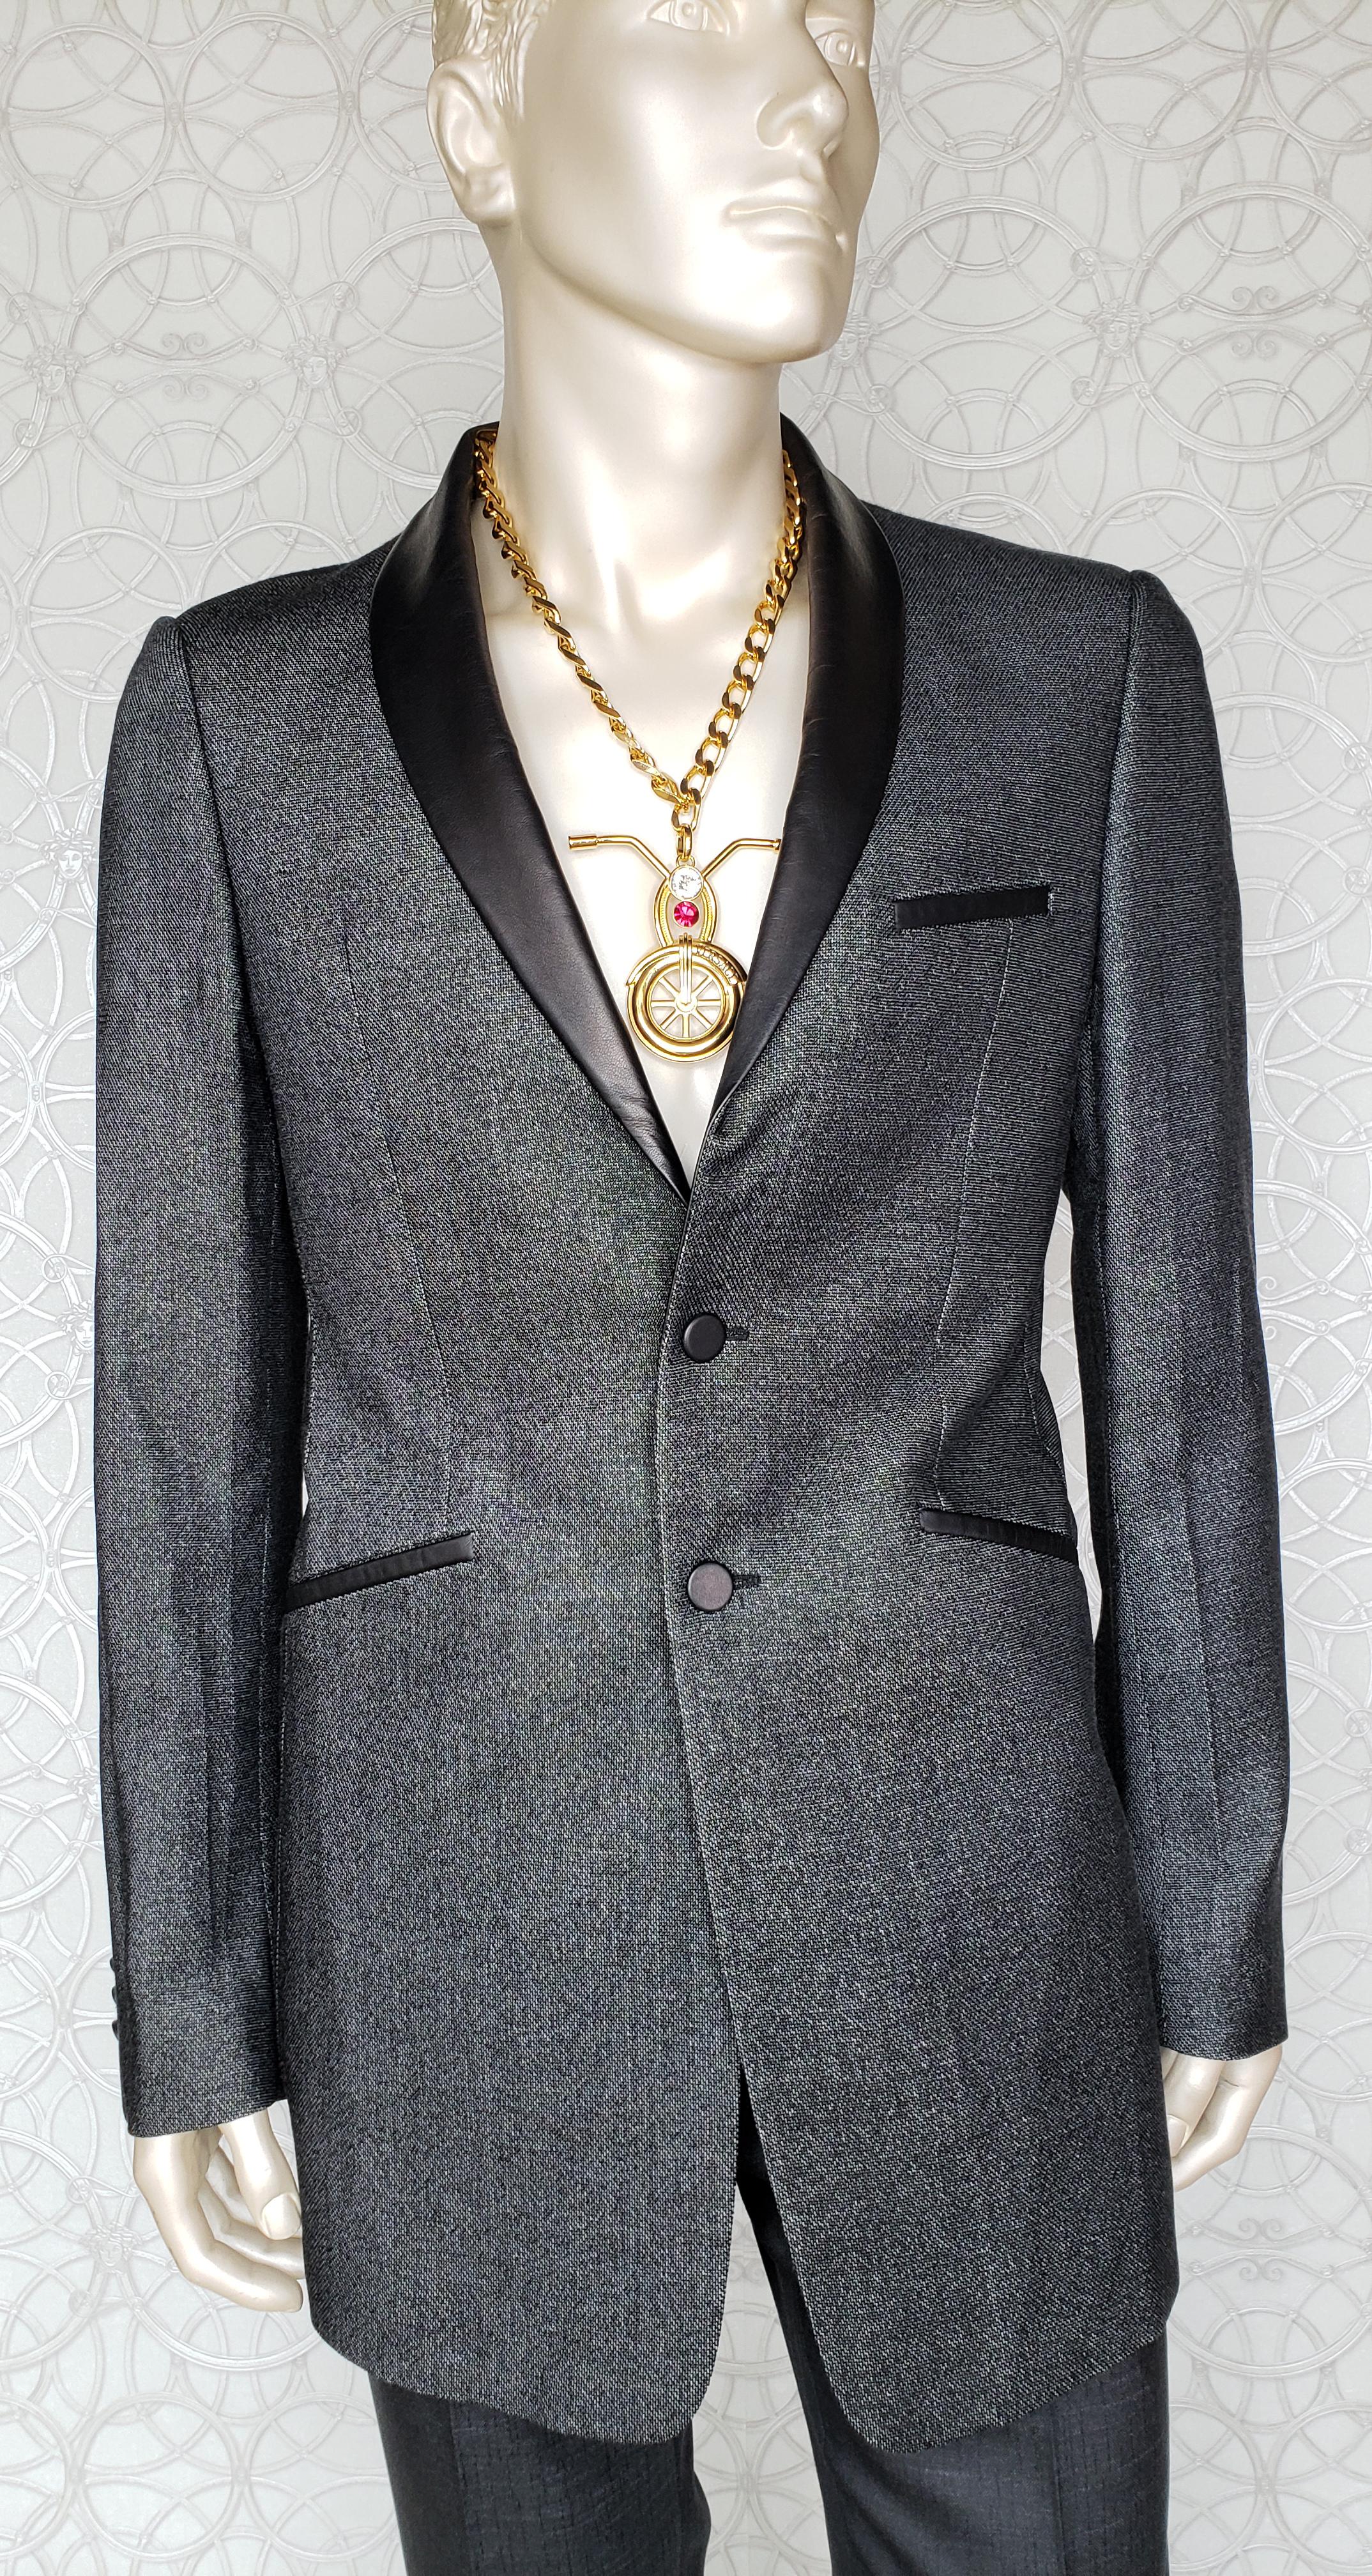 S/S 2011 look #7 NEW VERSACE GRAY WOOL and SILK SUIT 48 - 38 (M) For Sale 2